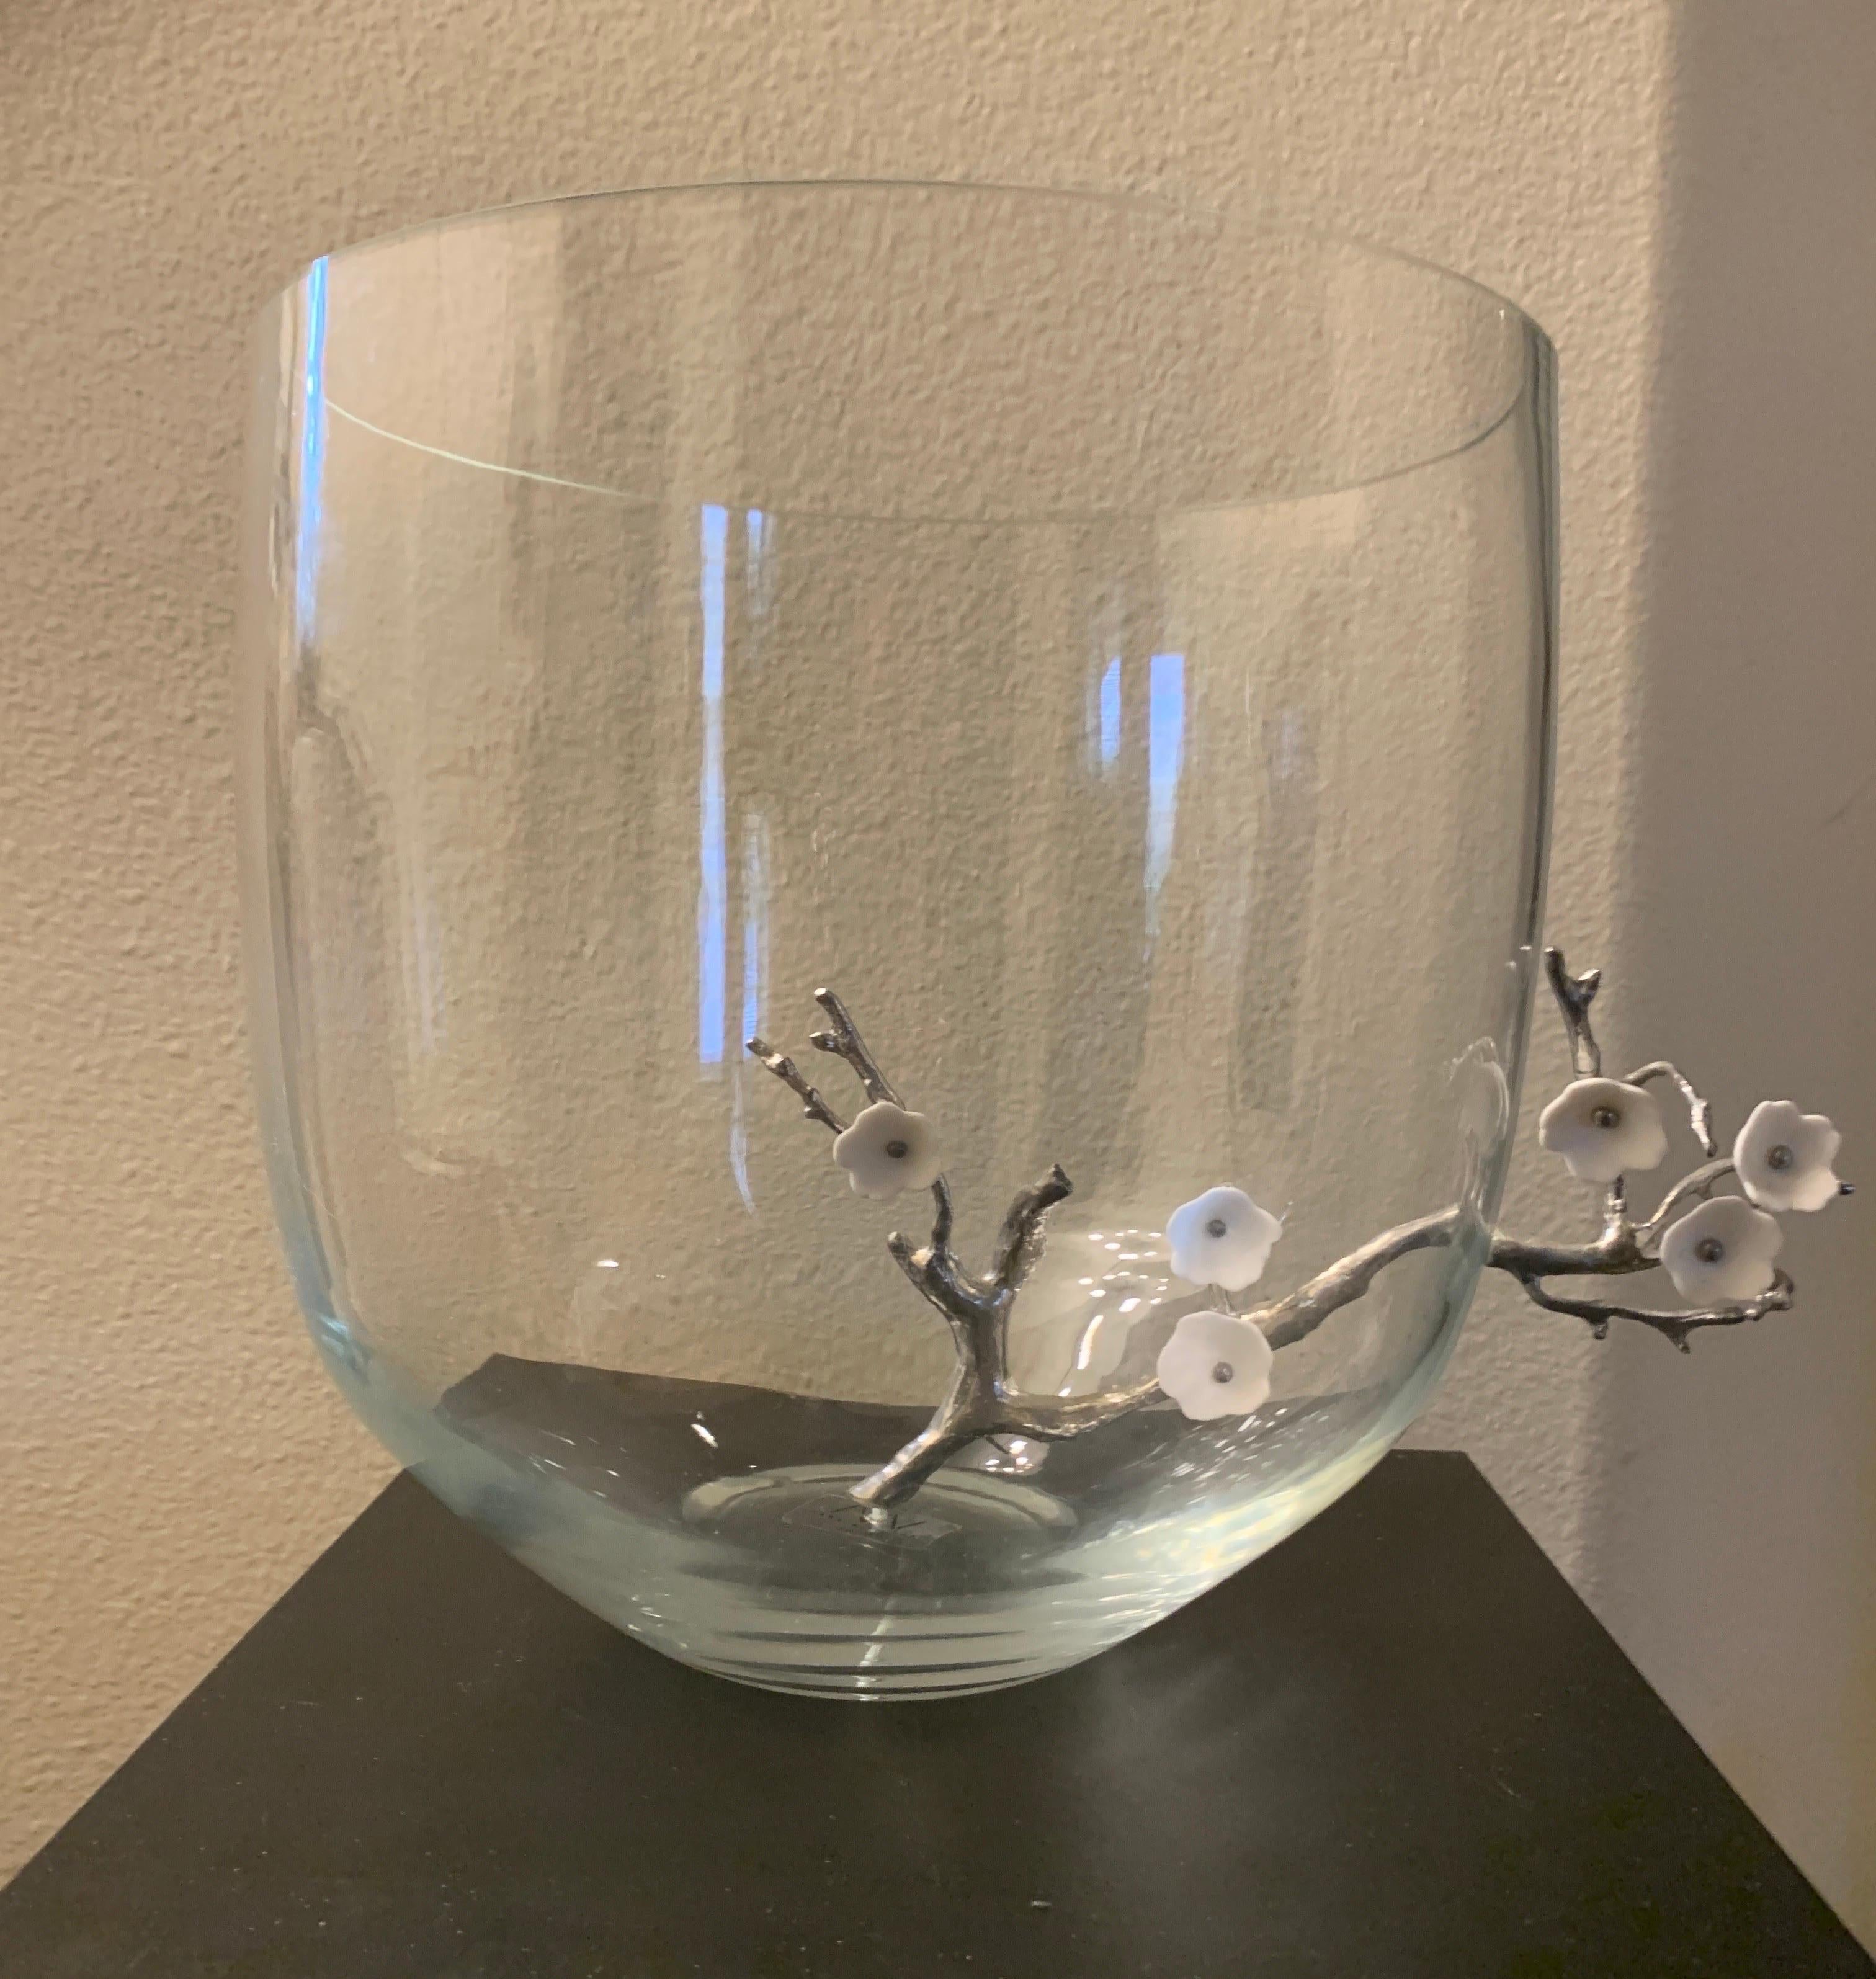 This is the large version of a glass cherry blossom bowl by French designer Vanessa Mitranii. The metal cherry blossom came in 2 size bowls and also some glass cups. This larger bowl has a shortened cherry blossom inside the vessel and continues to